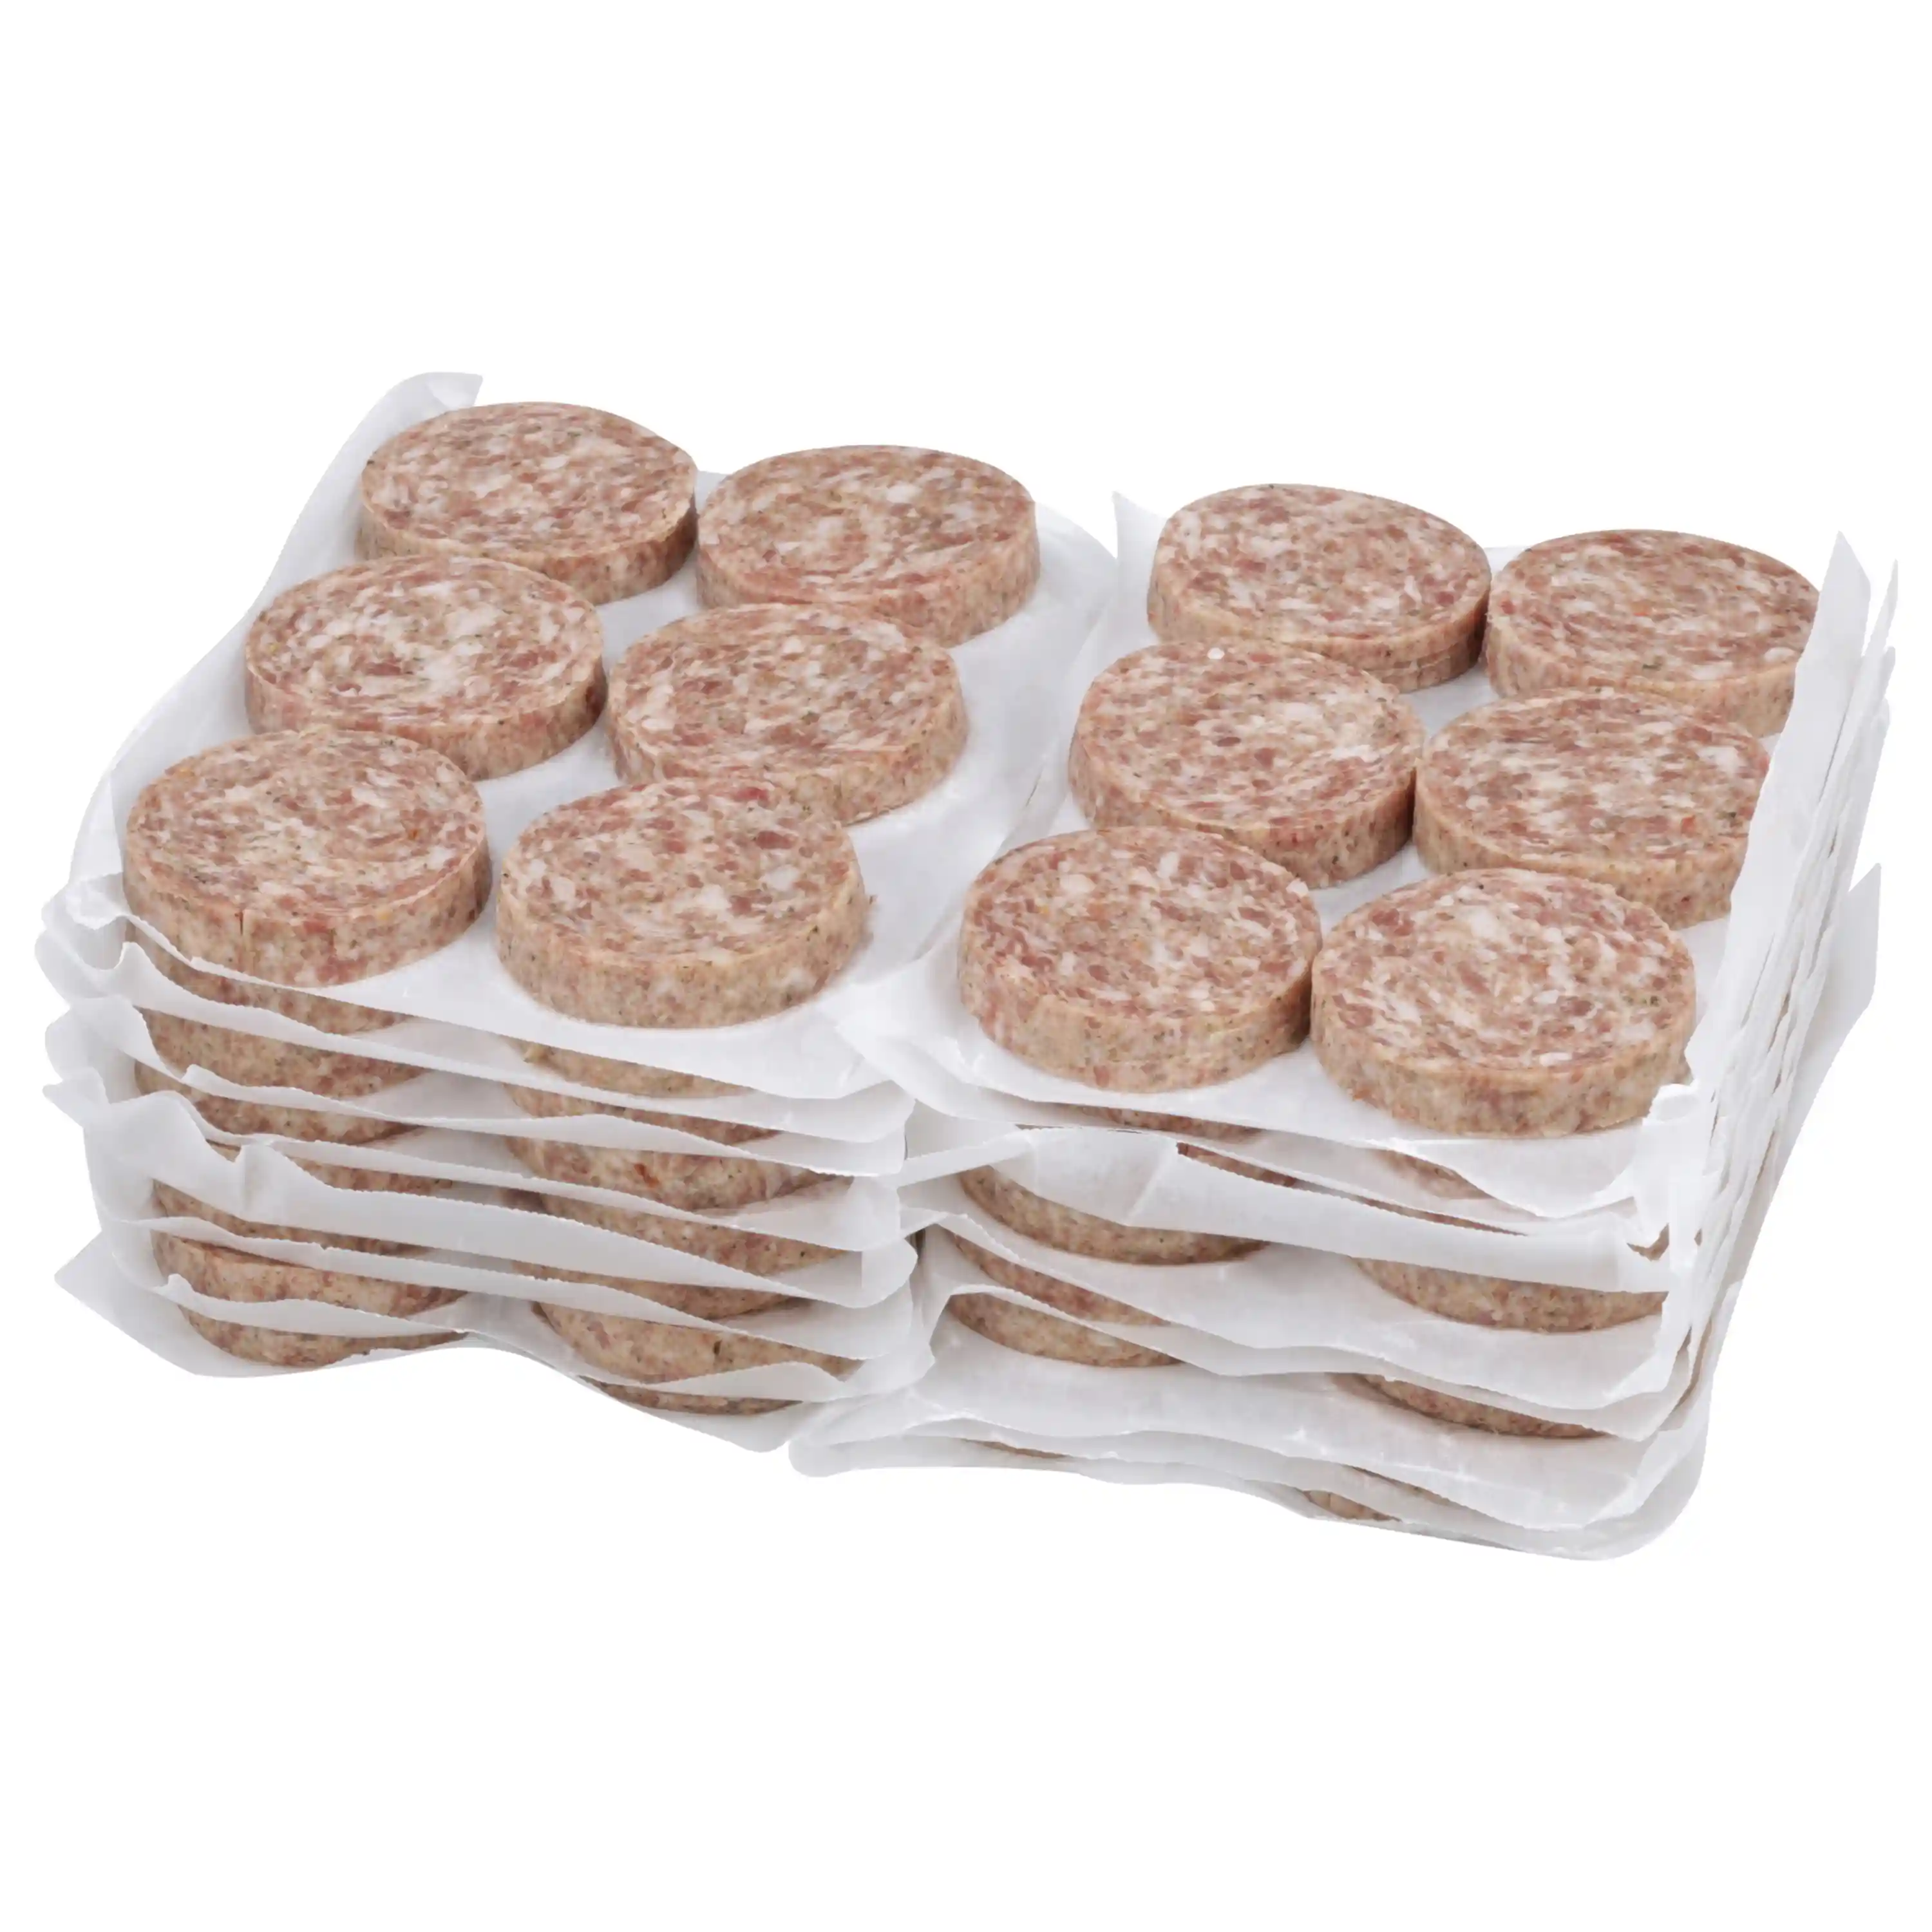 Rudy's Farm® Raw Whole Hog Country Style Sausage Patties, 2.875 Inch, 2.0 oz_image_21